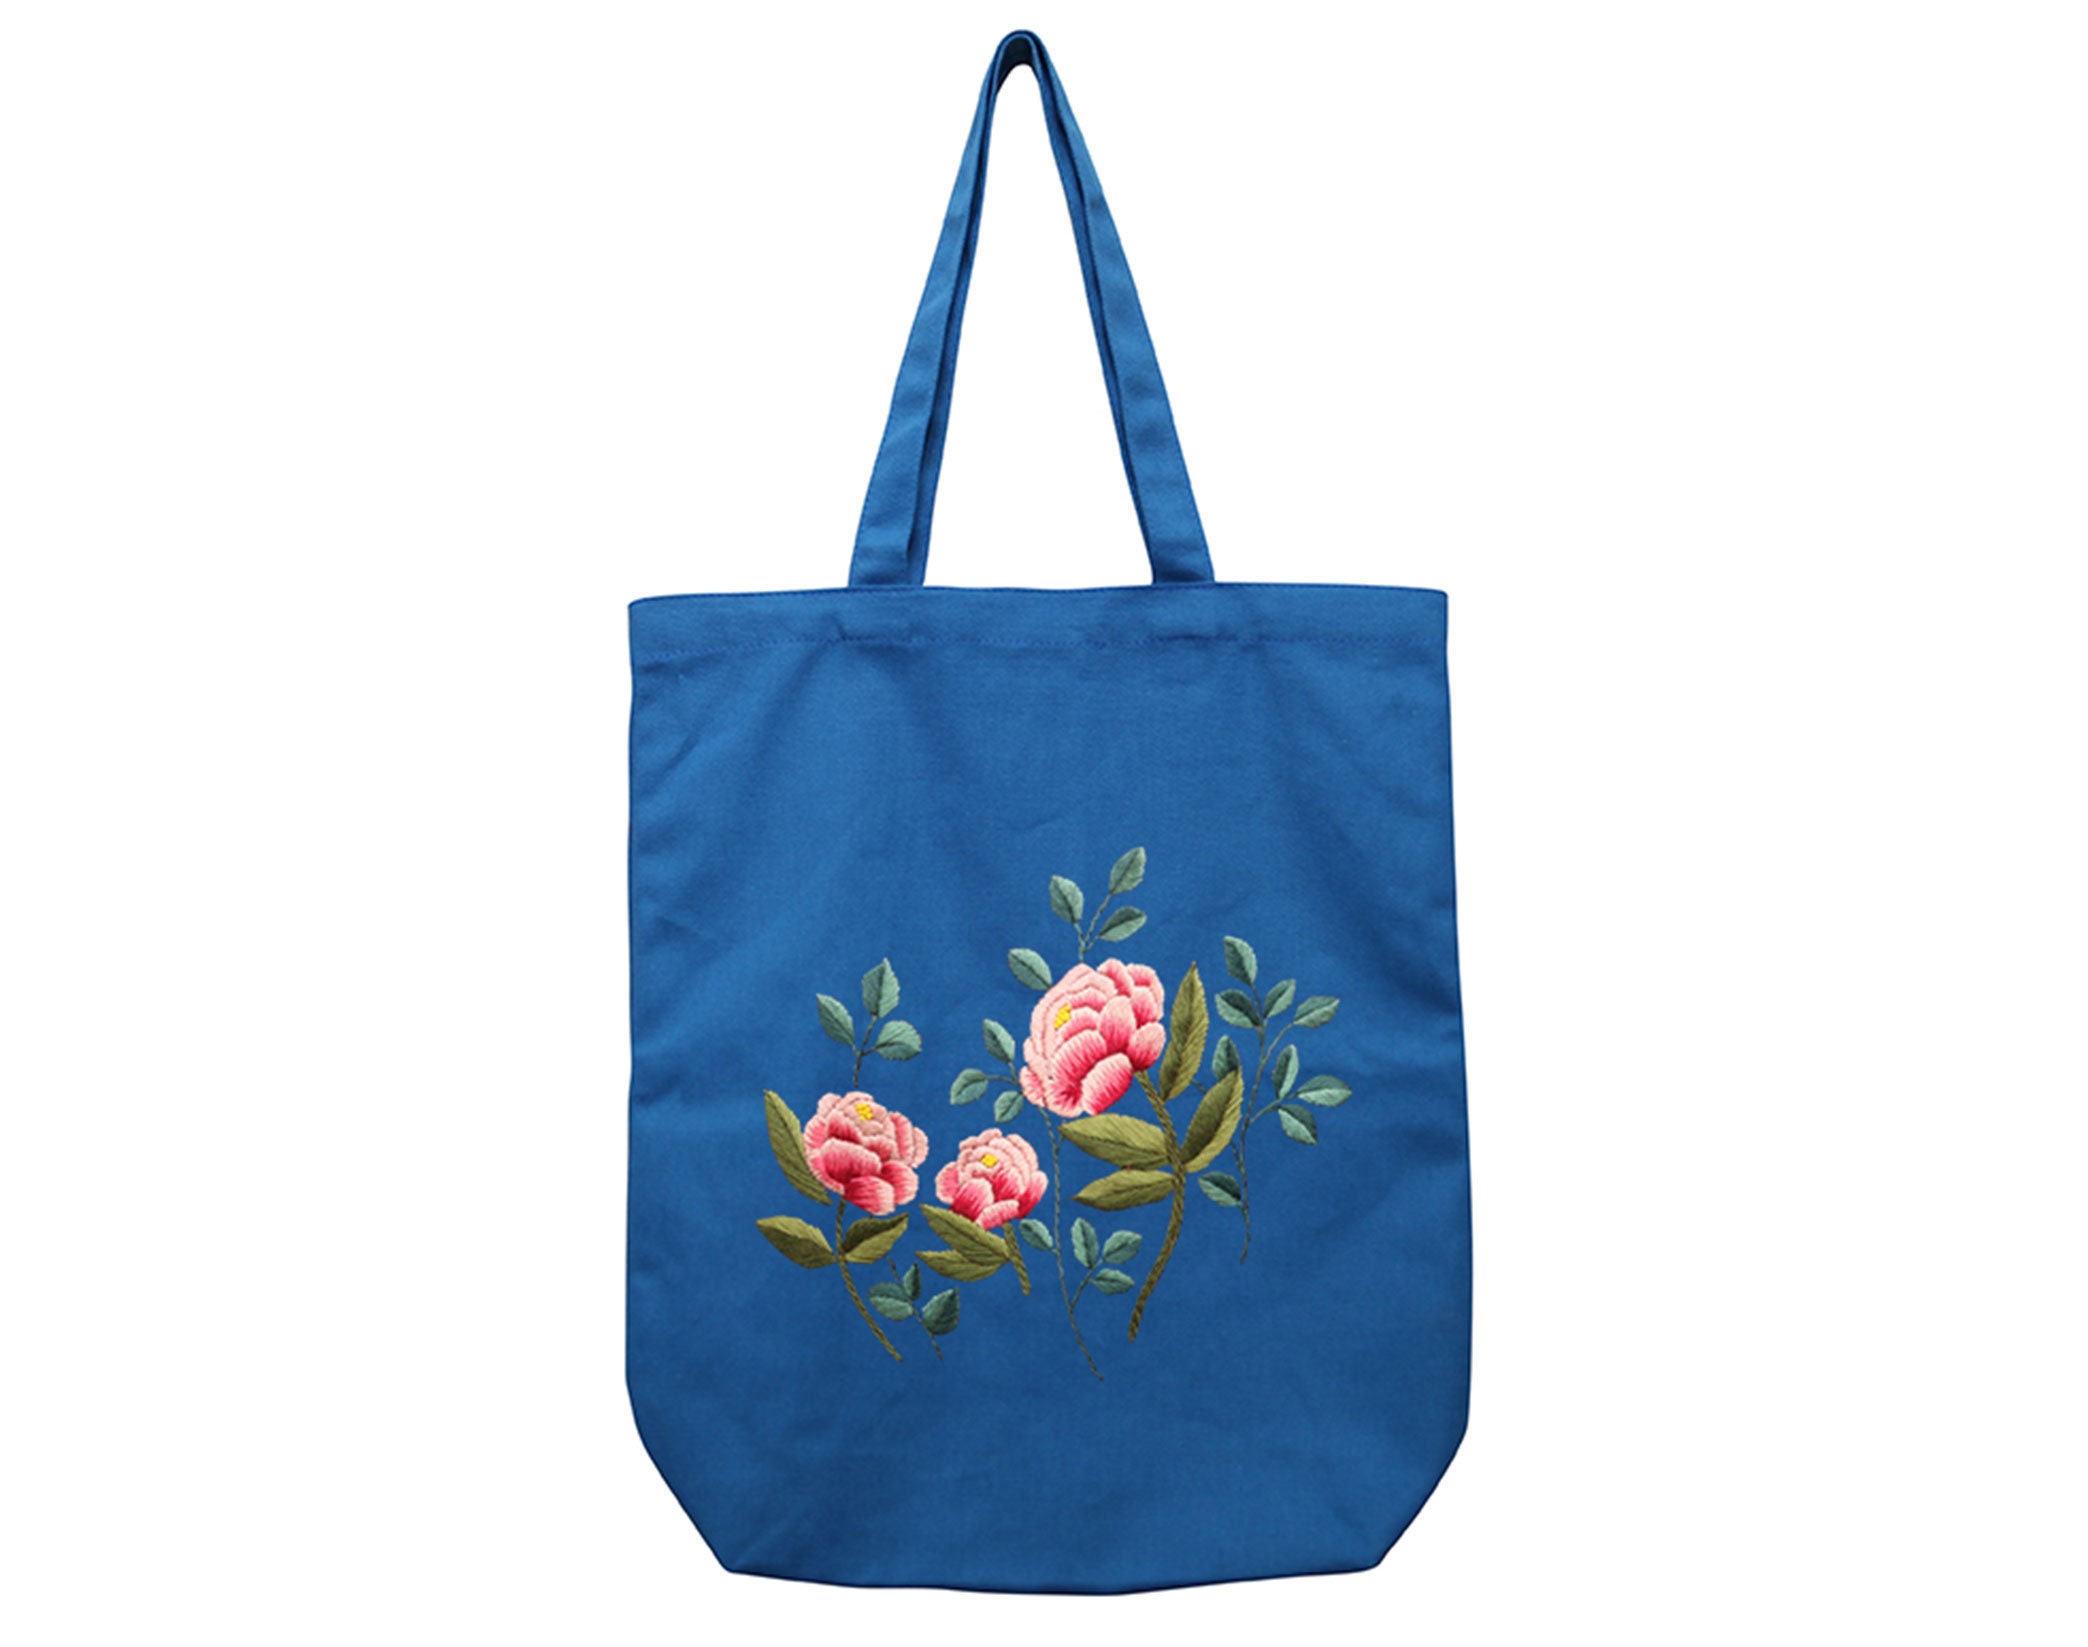 Hand Embroidery Rose Shoulder Bag, Canvas Tote Bag With Flowers Embroidery  Pattern, Floral Embroidery for Beginner, Simple Embroidery Kit 